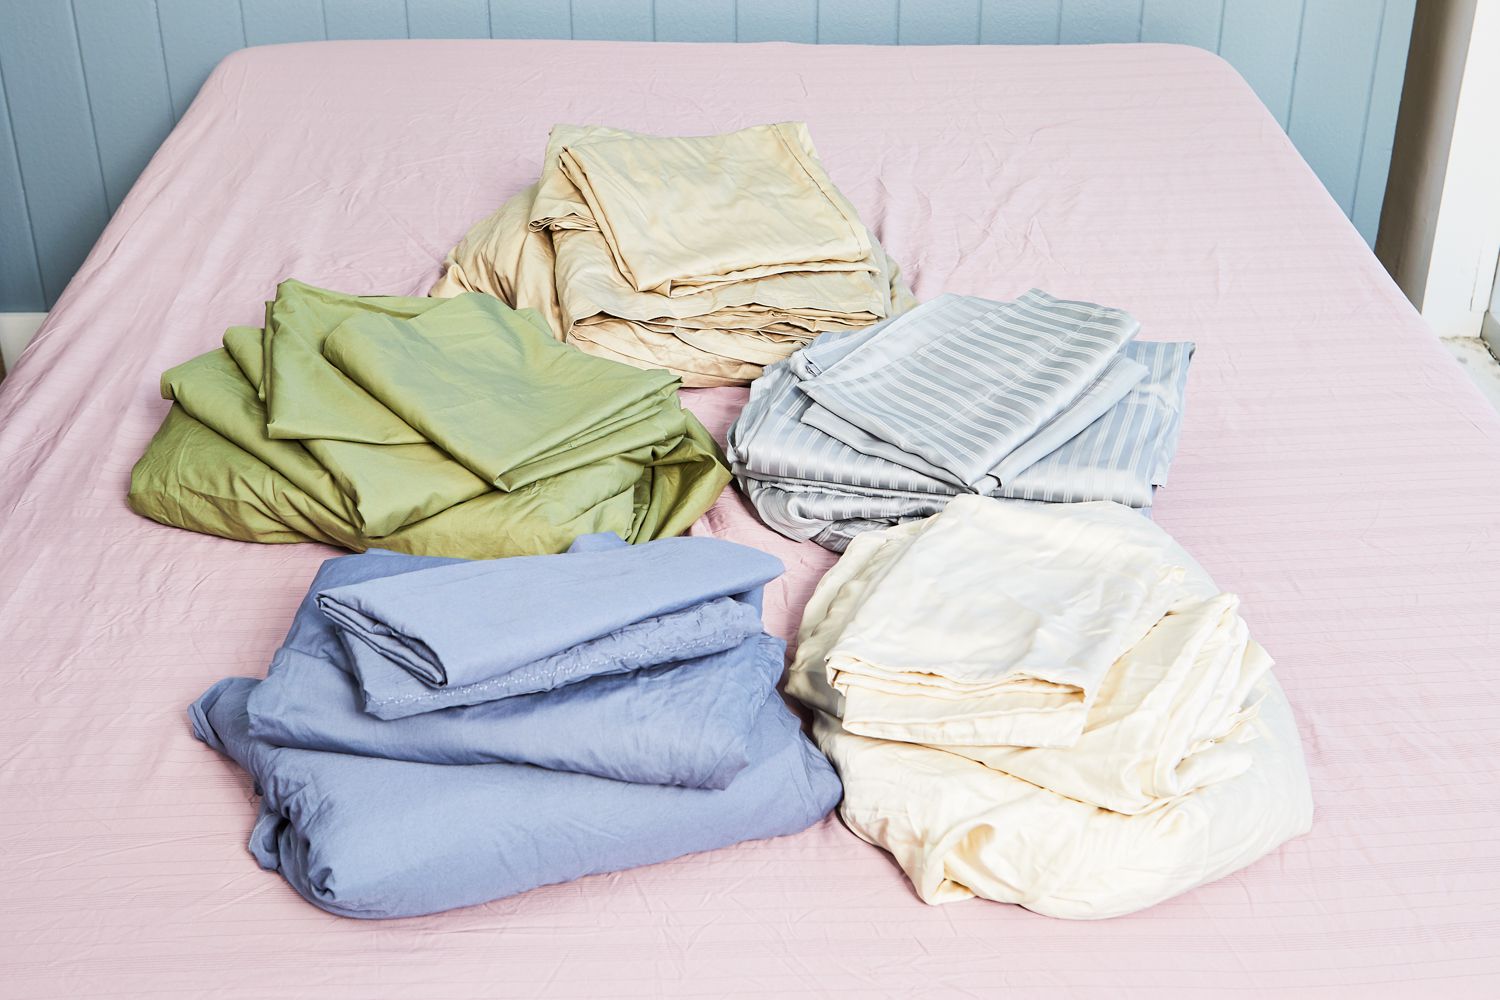 5 Bed Sheet Colors To Improve Sleep: Experts Share Their Favorites